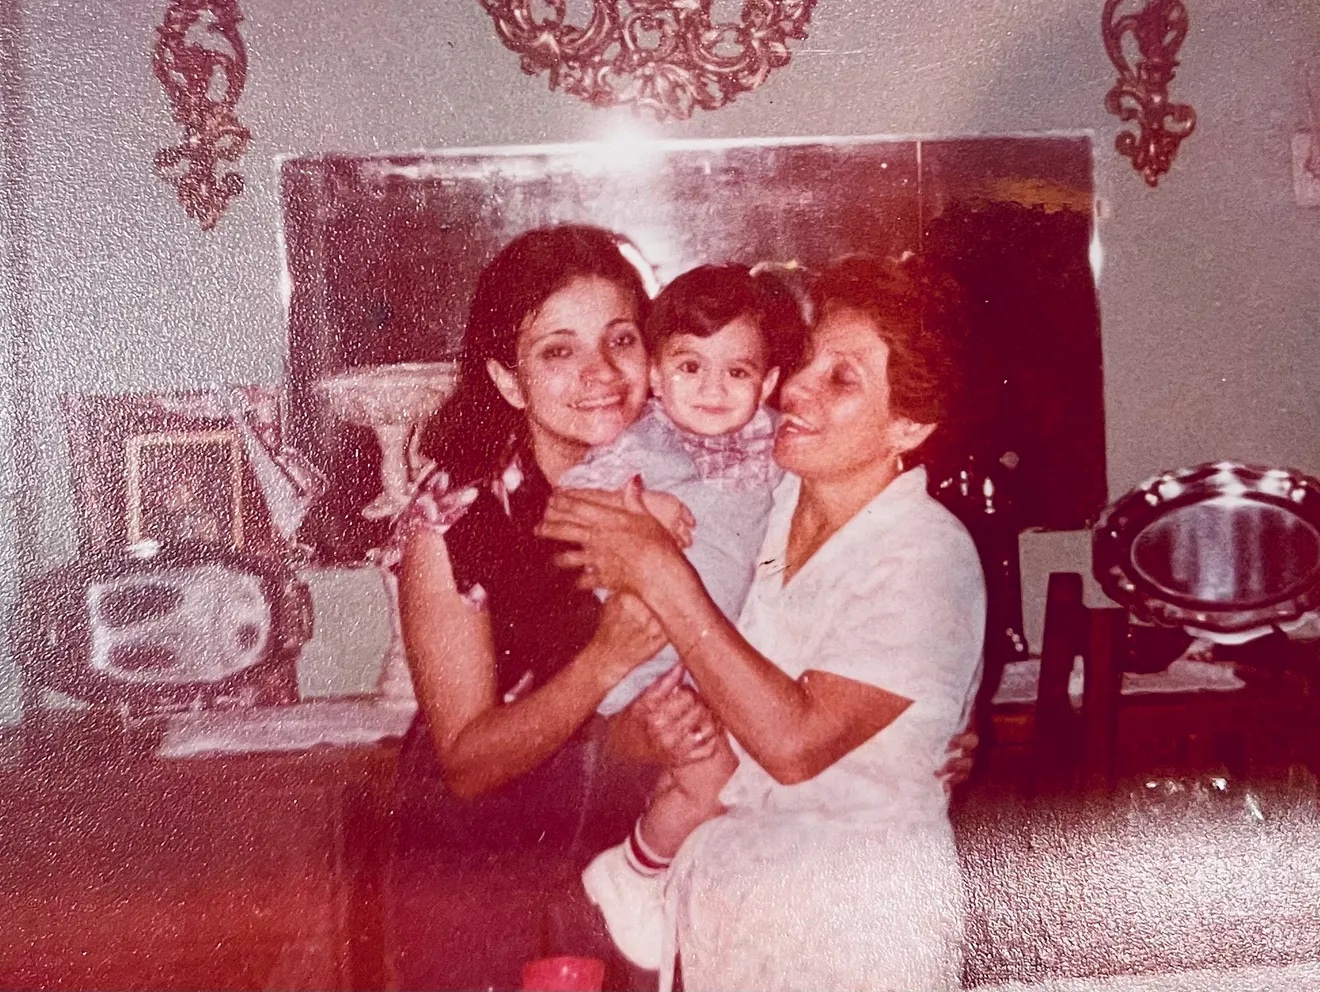 Rafael Agustin, middle, pictured with his mother, left, and grandmother, right. Courtesy of Rafael Agustin